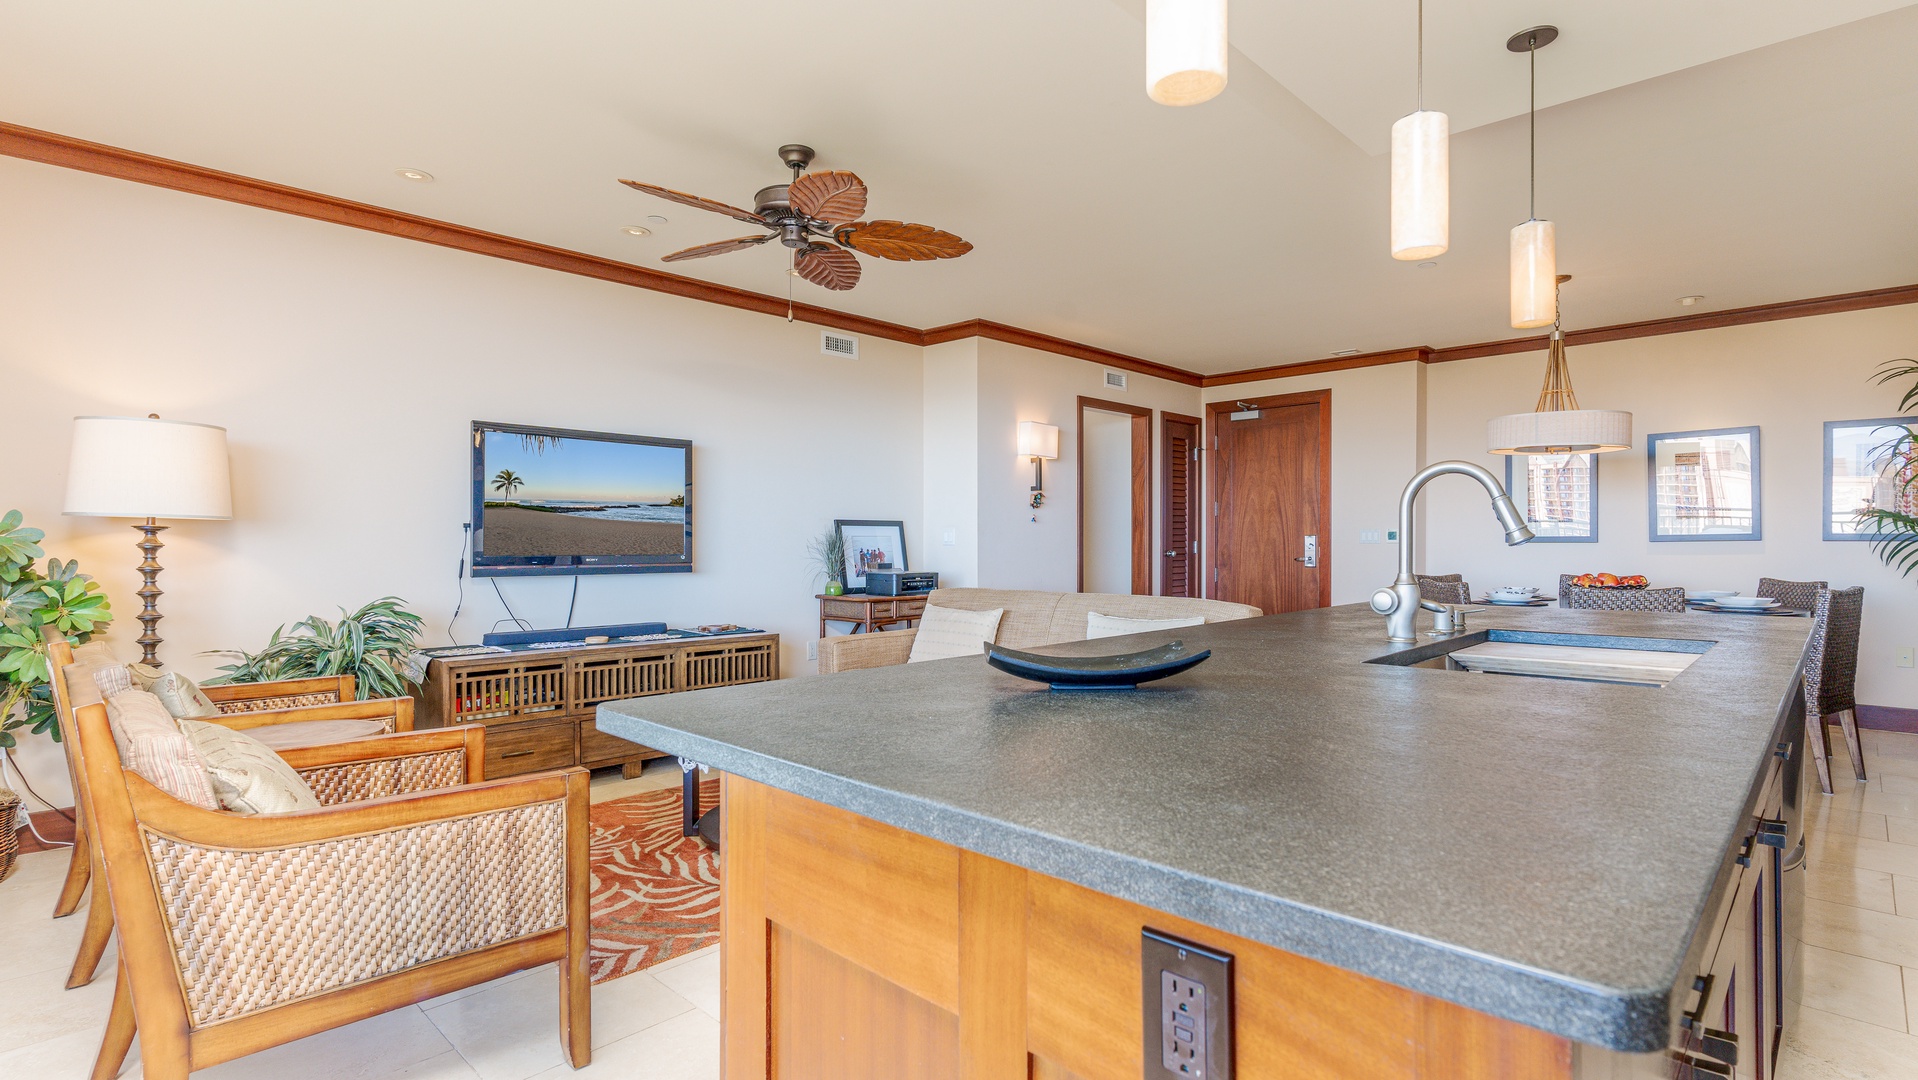 Kapolei Vacation Rentals, Ko Olina Beach Villas B1101 - The TV for entertainment and the design for relaxation.